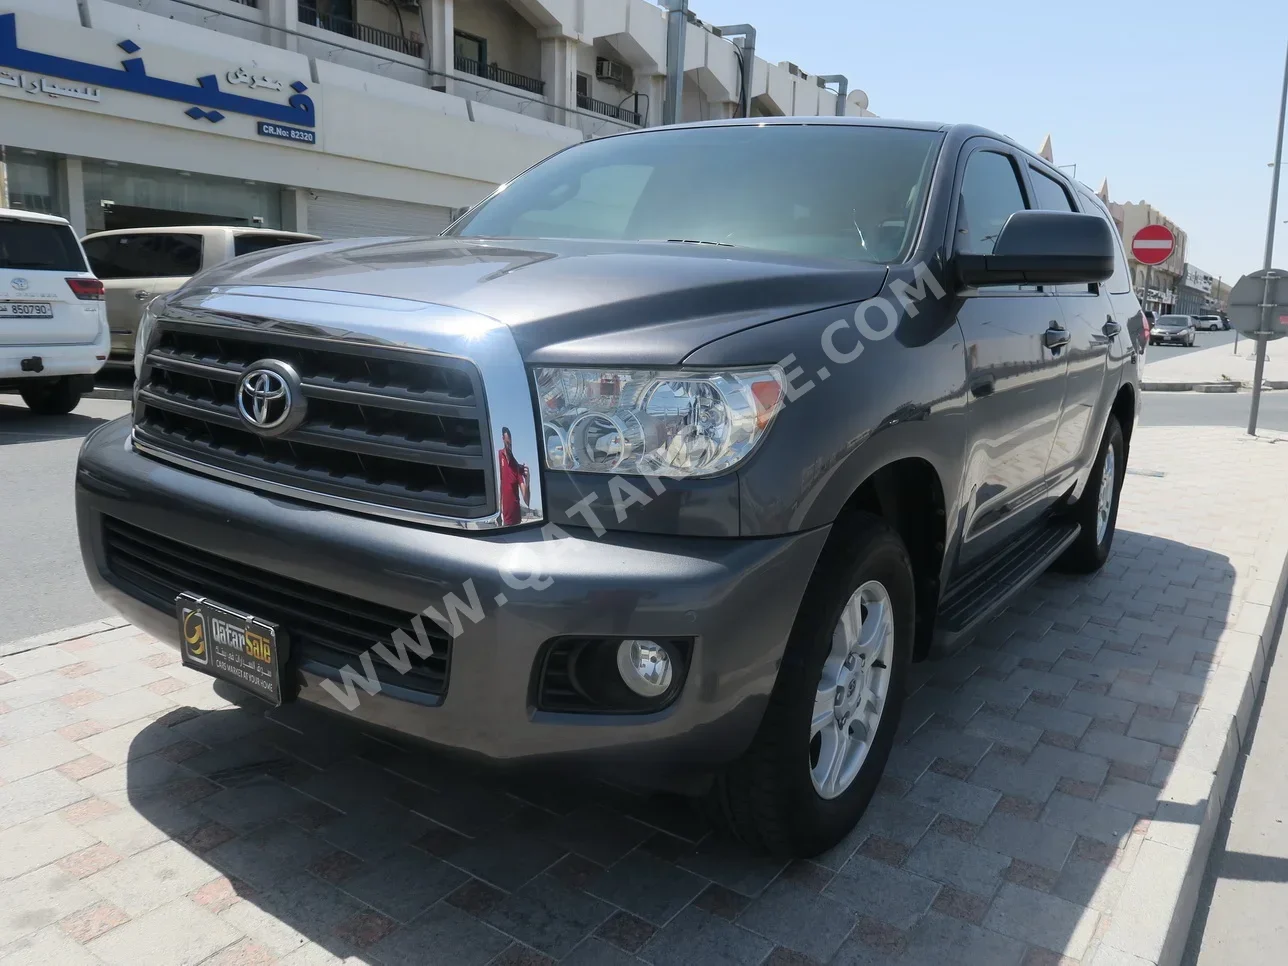 Toyota  Sequoia  2015  Automatic  144,000 Km  8 Cylinder  Four Wheel Drive (4WD)  SUV  Gray